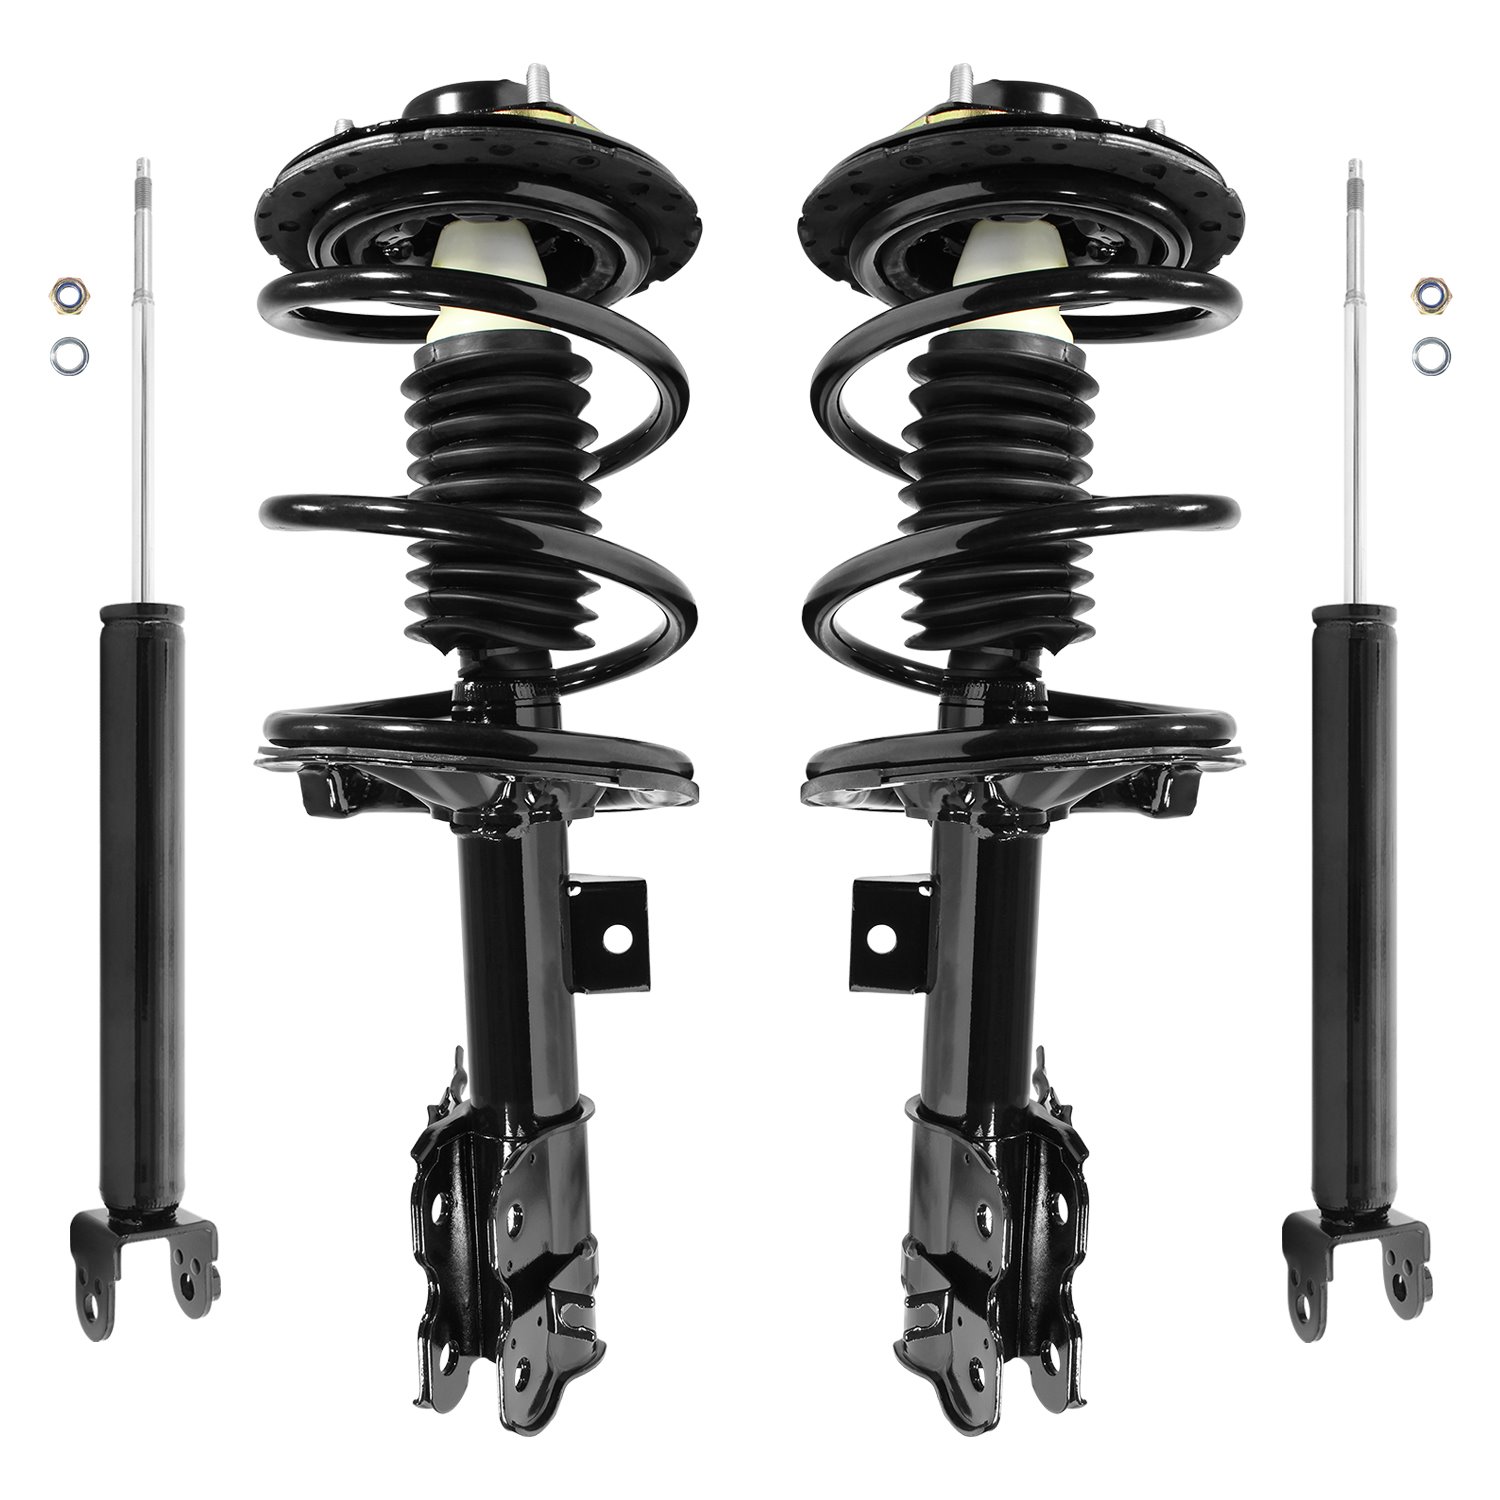 4-11333-255900-001 Front & Rear Suspension Strut & Coil Spring Assembly Fits Select Nissan Maxima